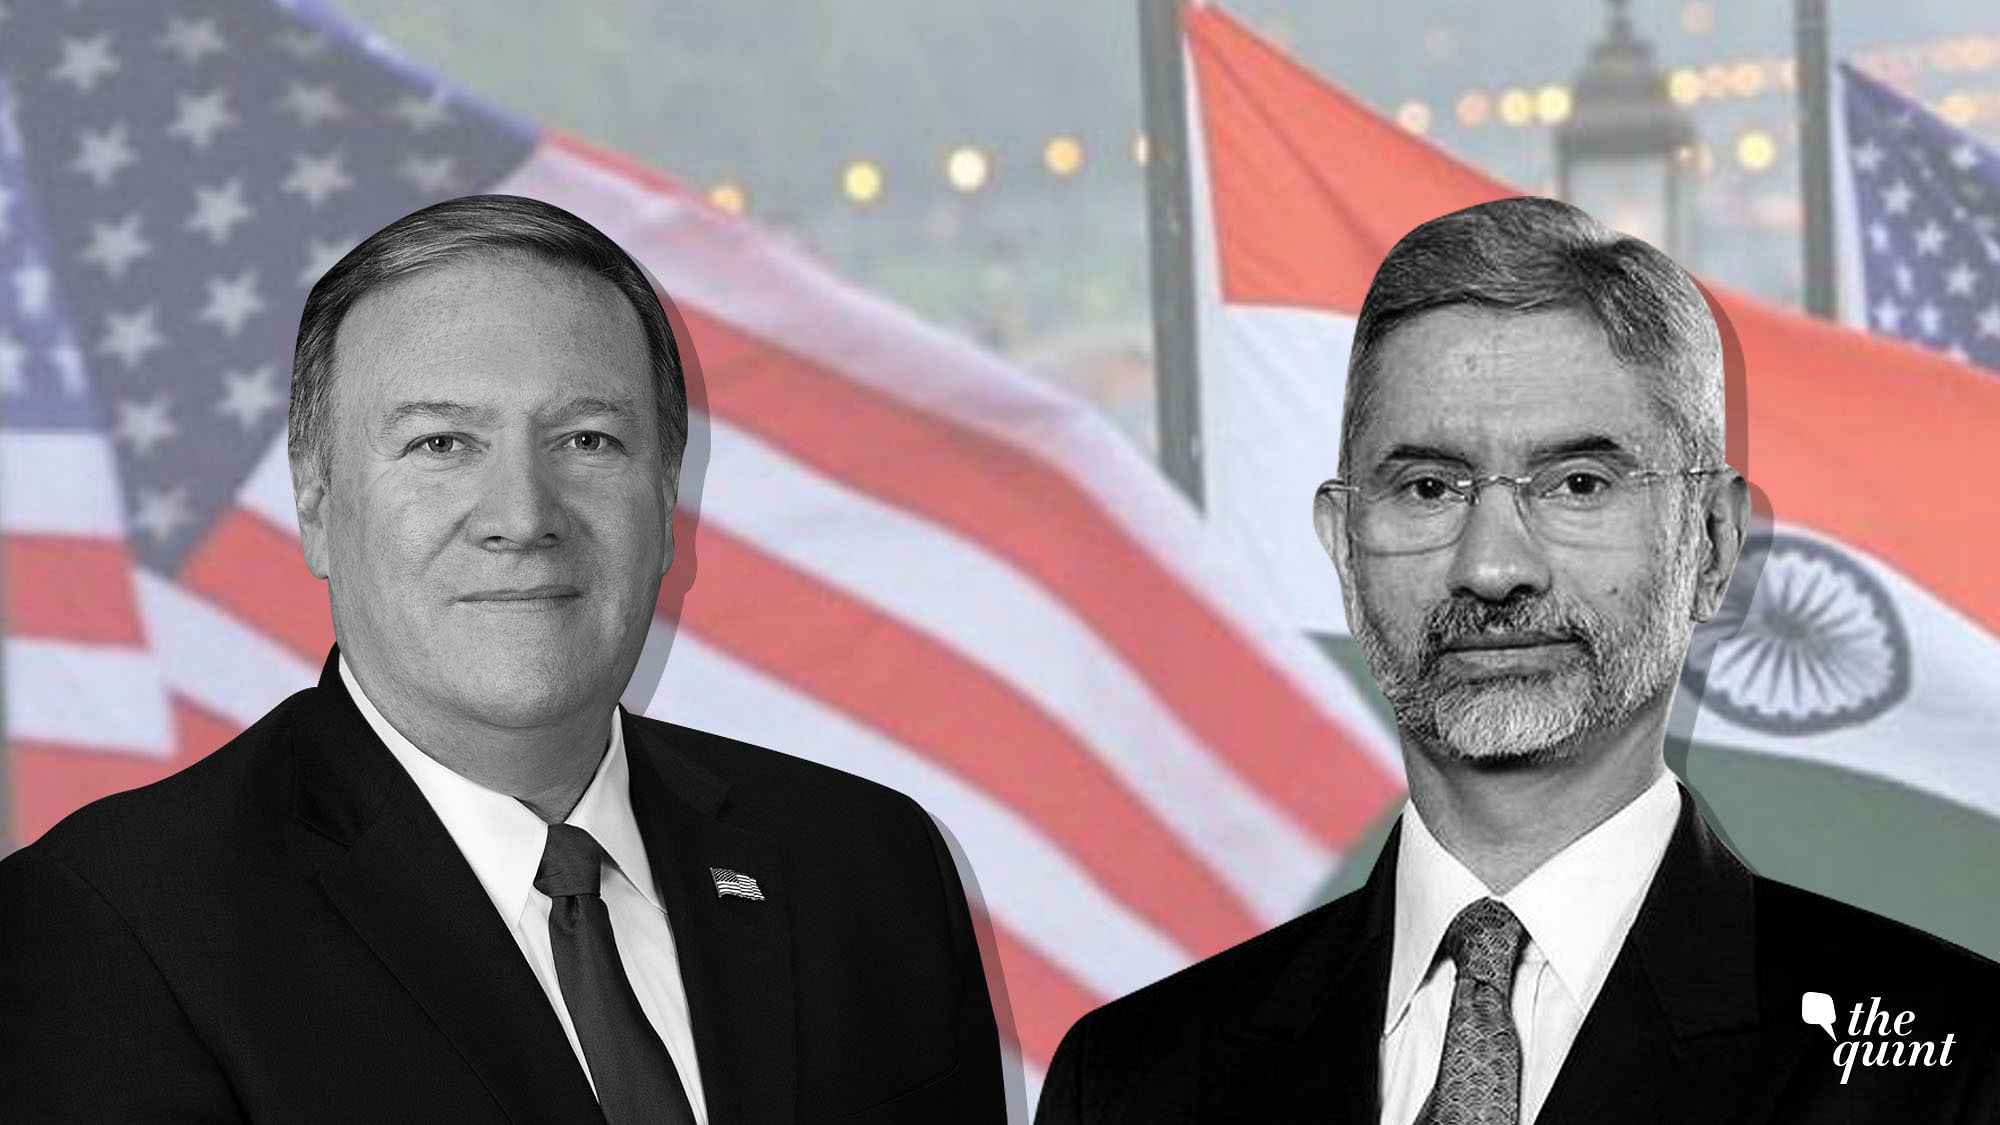 Image of Mike Pompeo (L) and S Jaishankar (R) used for representational purposes.